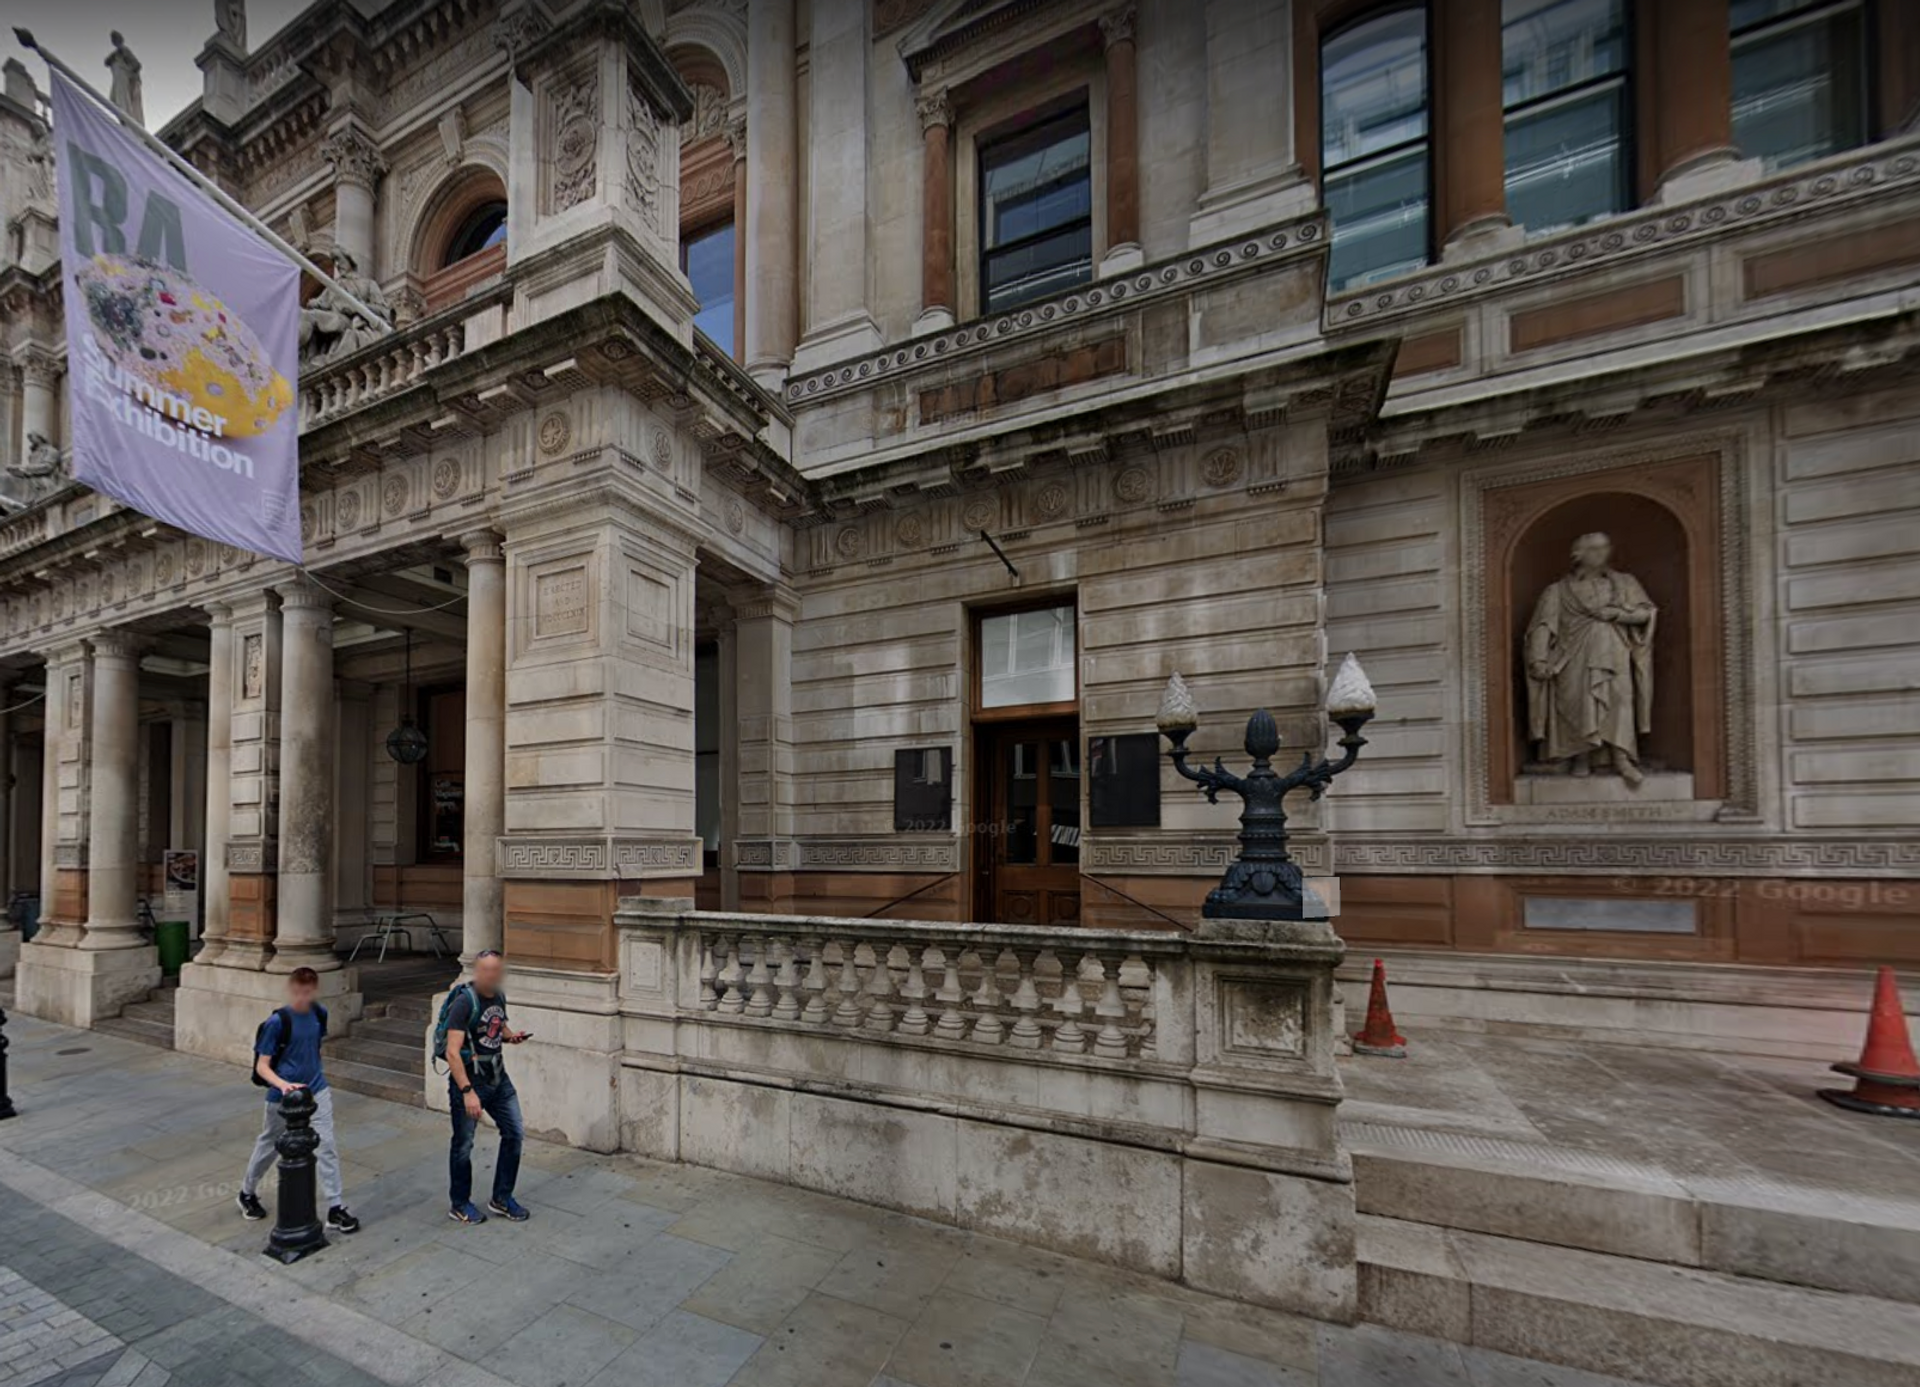 Exterior view of 6 Burlington Gardens, London, formerly occupied by Superblue London. © Google Street View